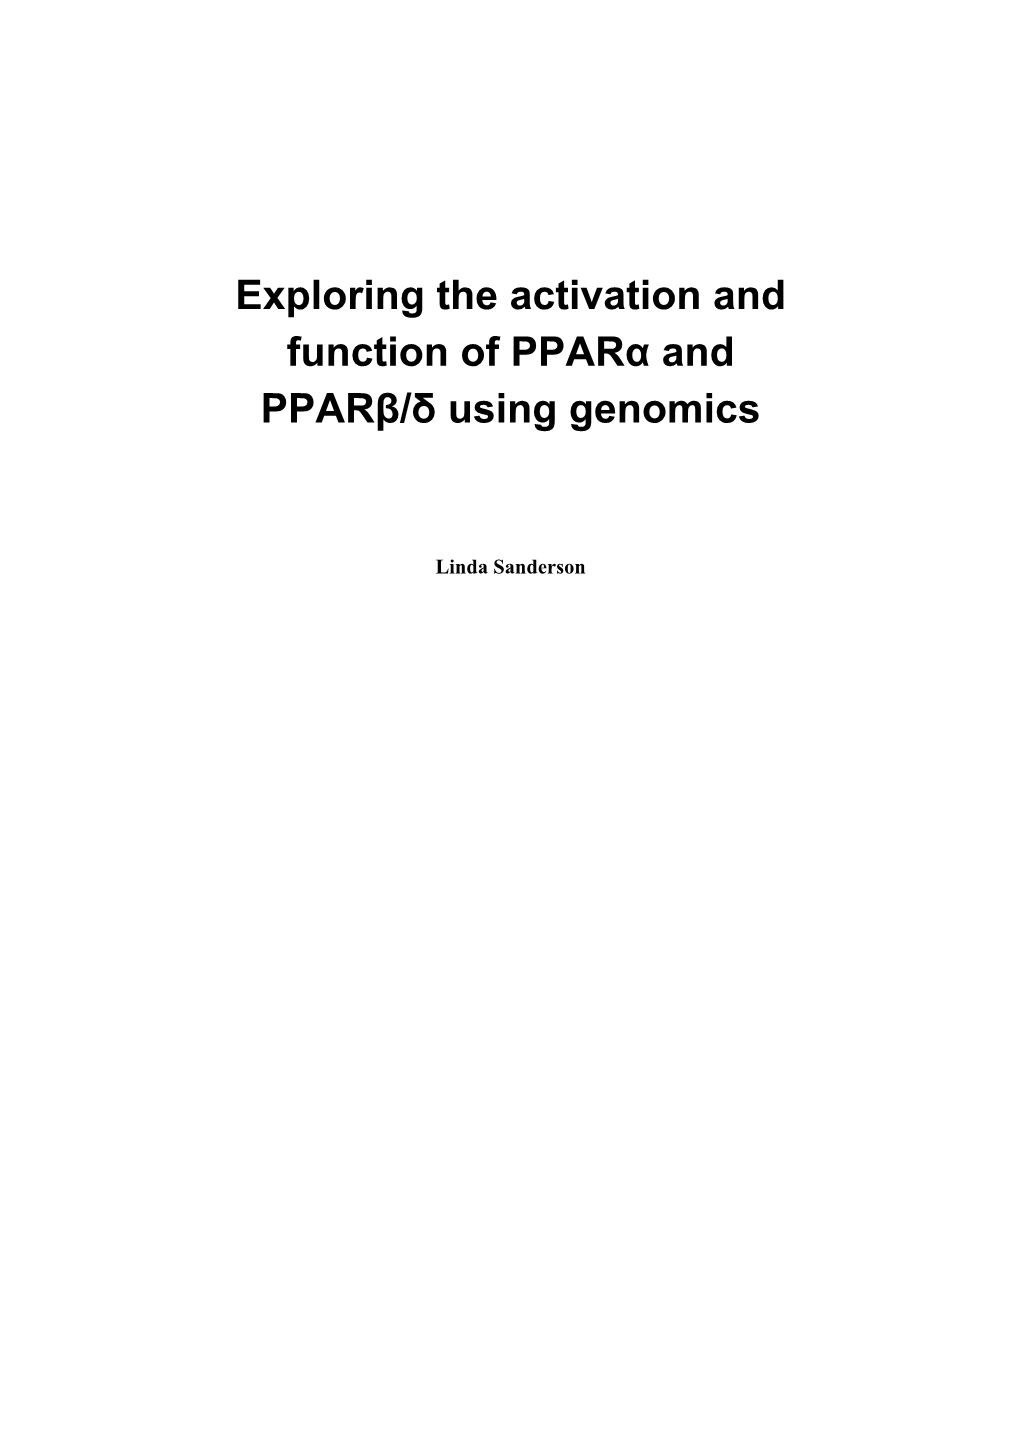 Exploring the Activation and Function of Pparα and Pparβ/Δ Using Genomics